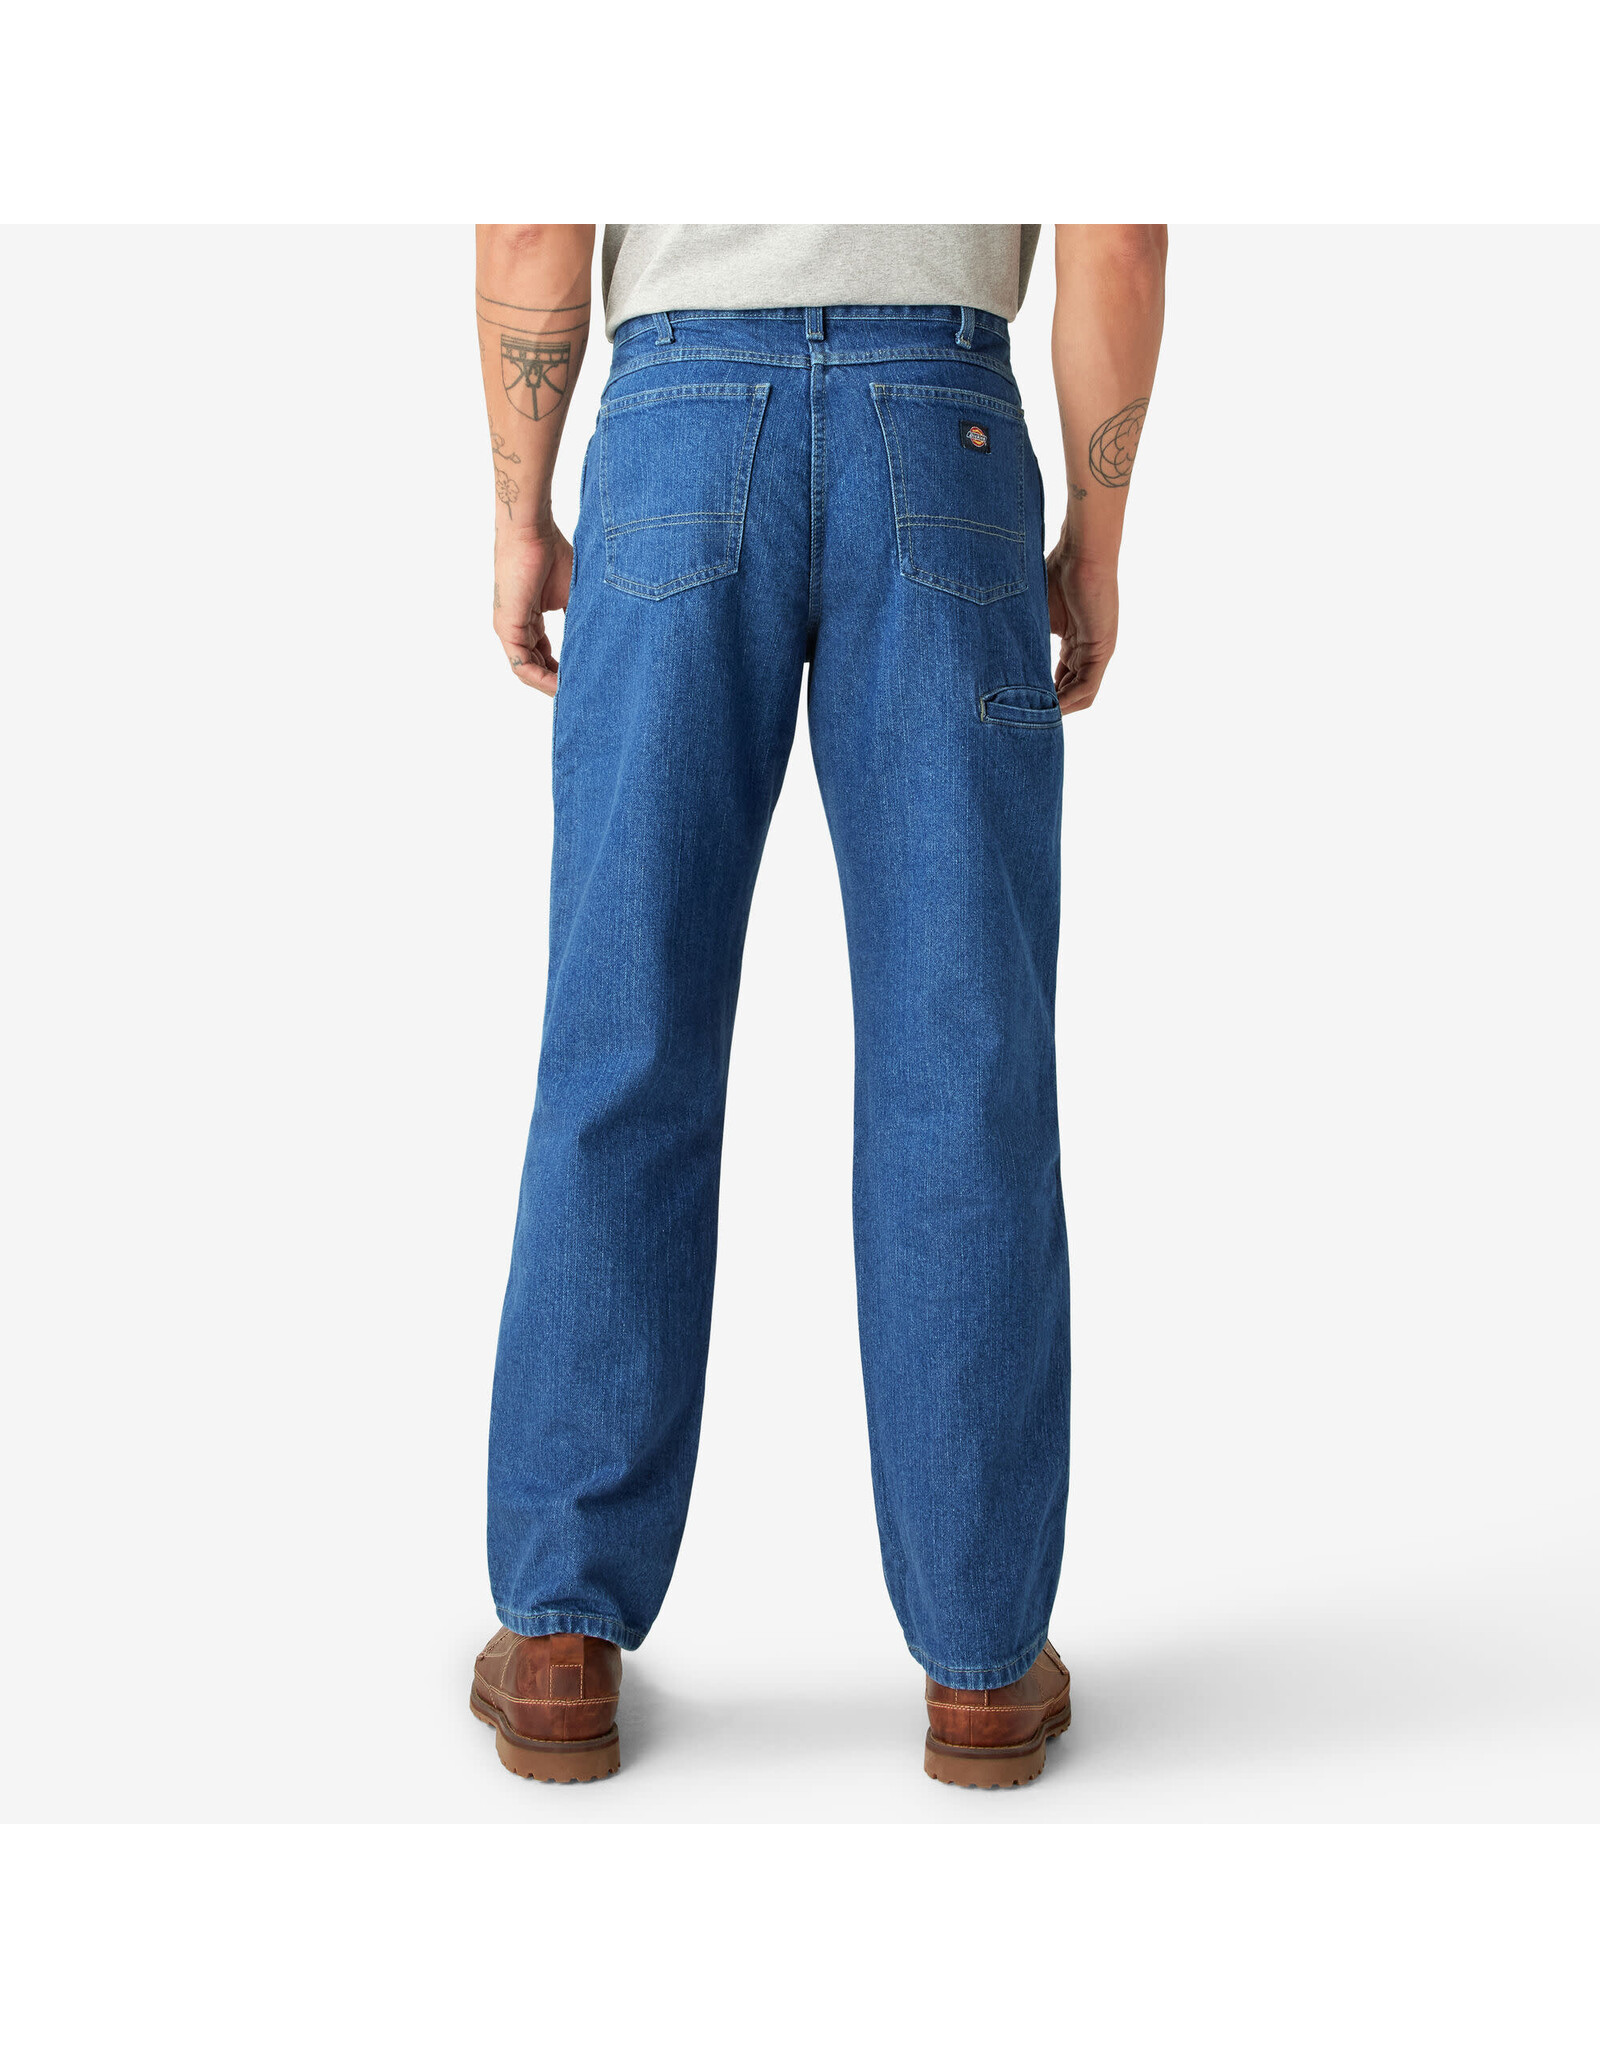 DICKIES Relaxed Fit Double Knee Jeans  Stonewashed Indigo Blue - 15293SNB